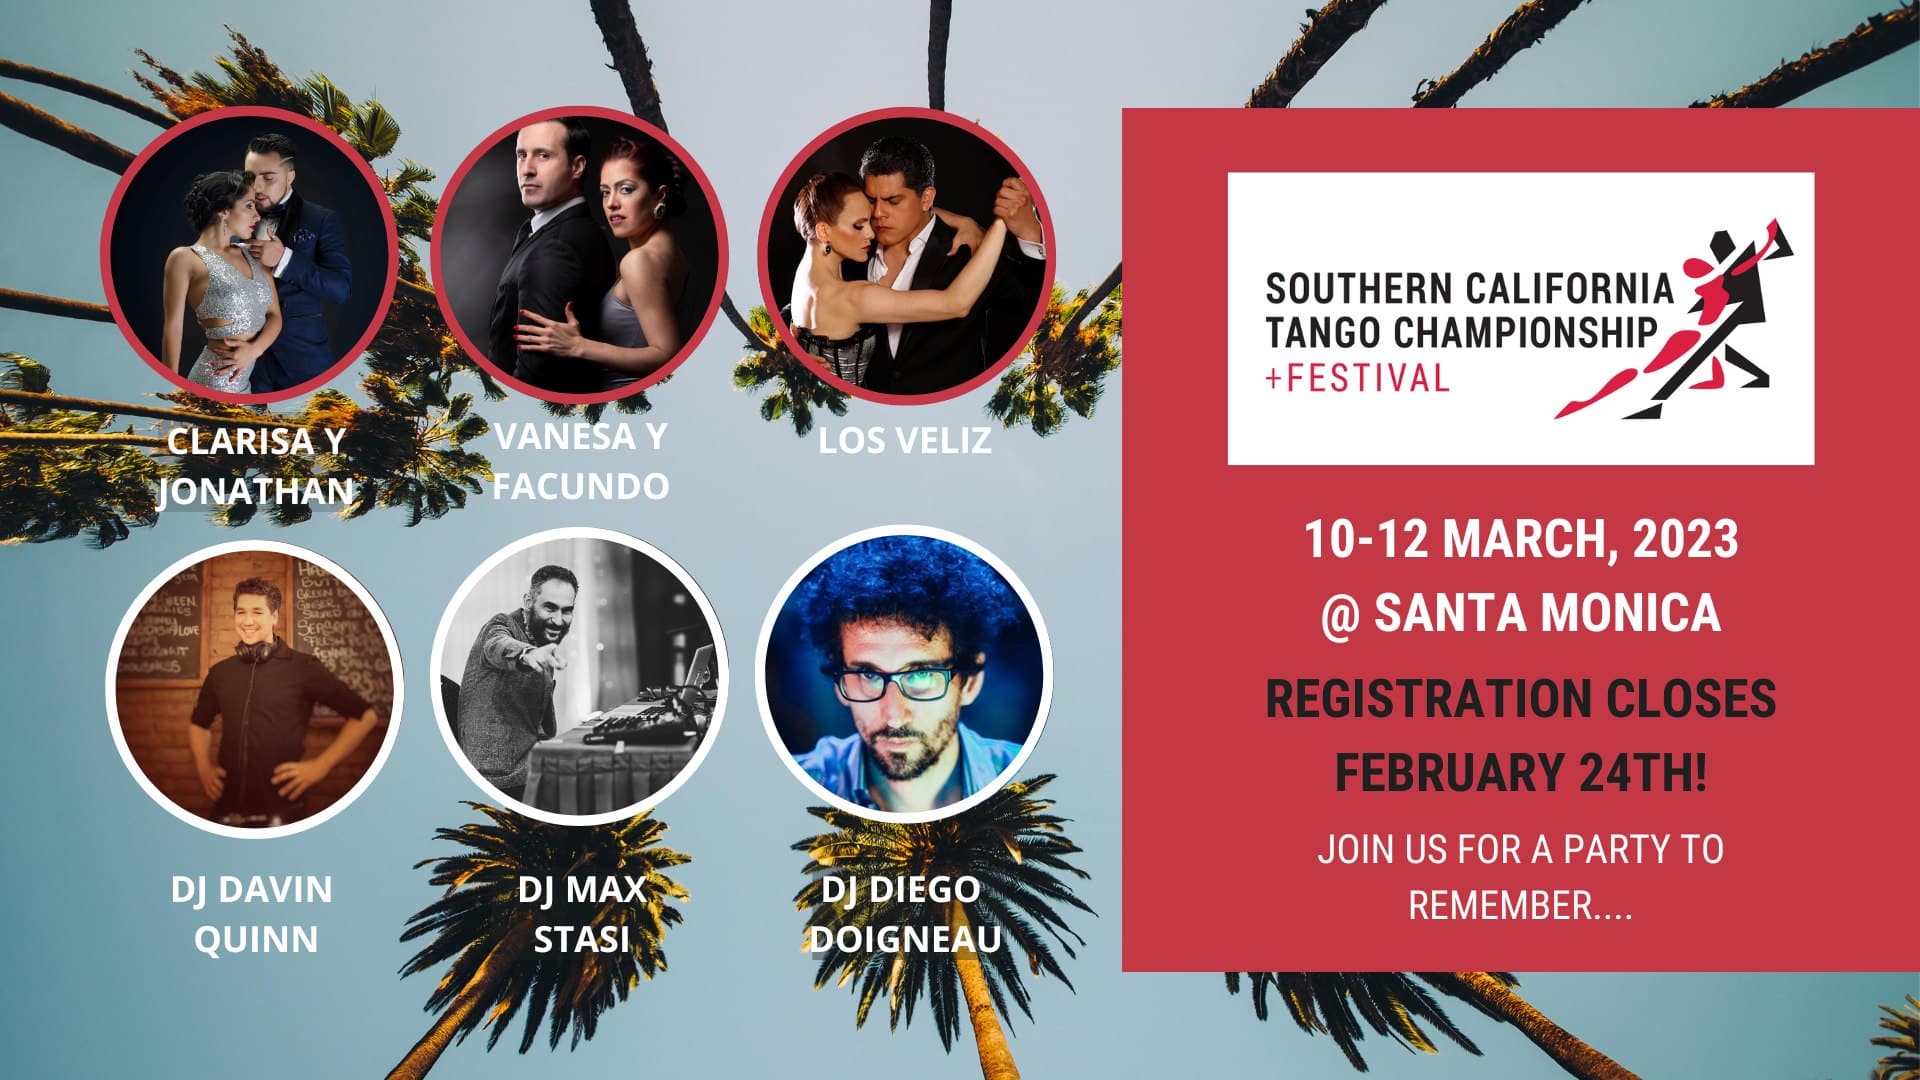 Southern California Tango Championship & Festival 2023 Preview Image